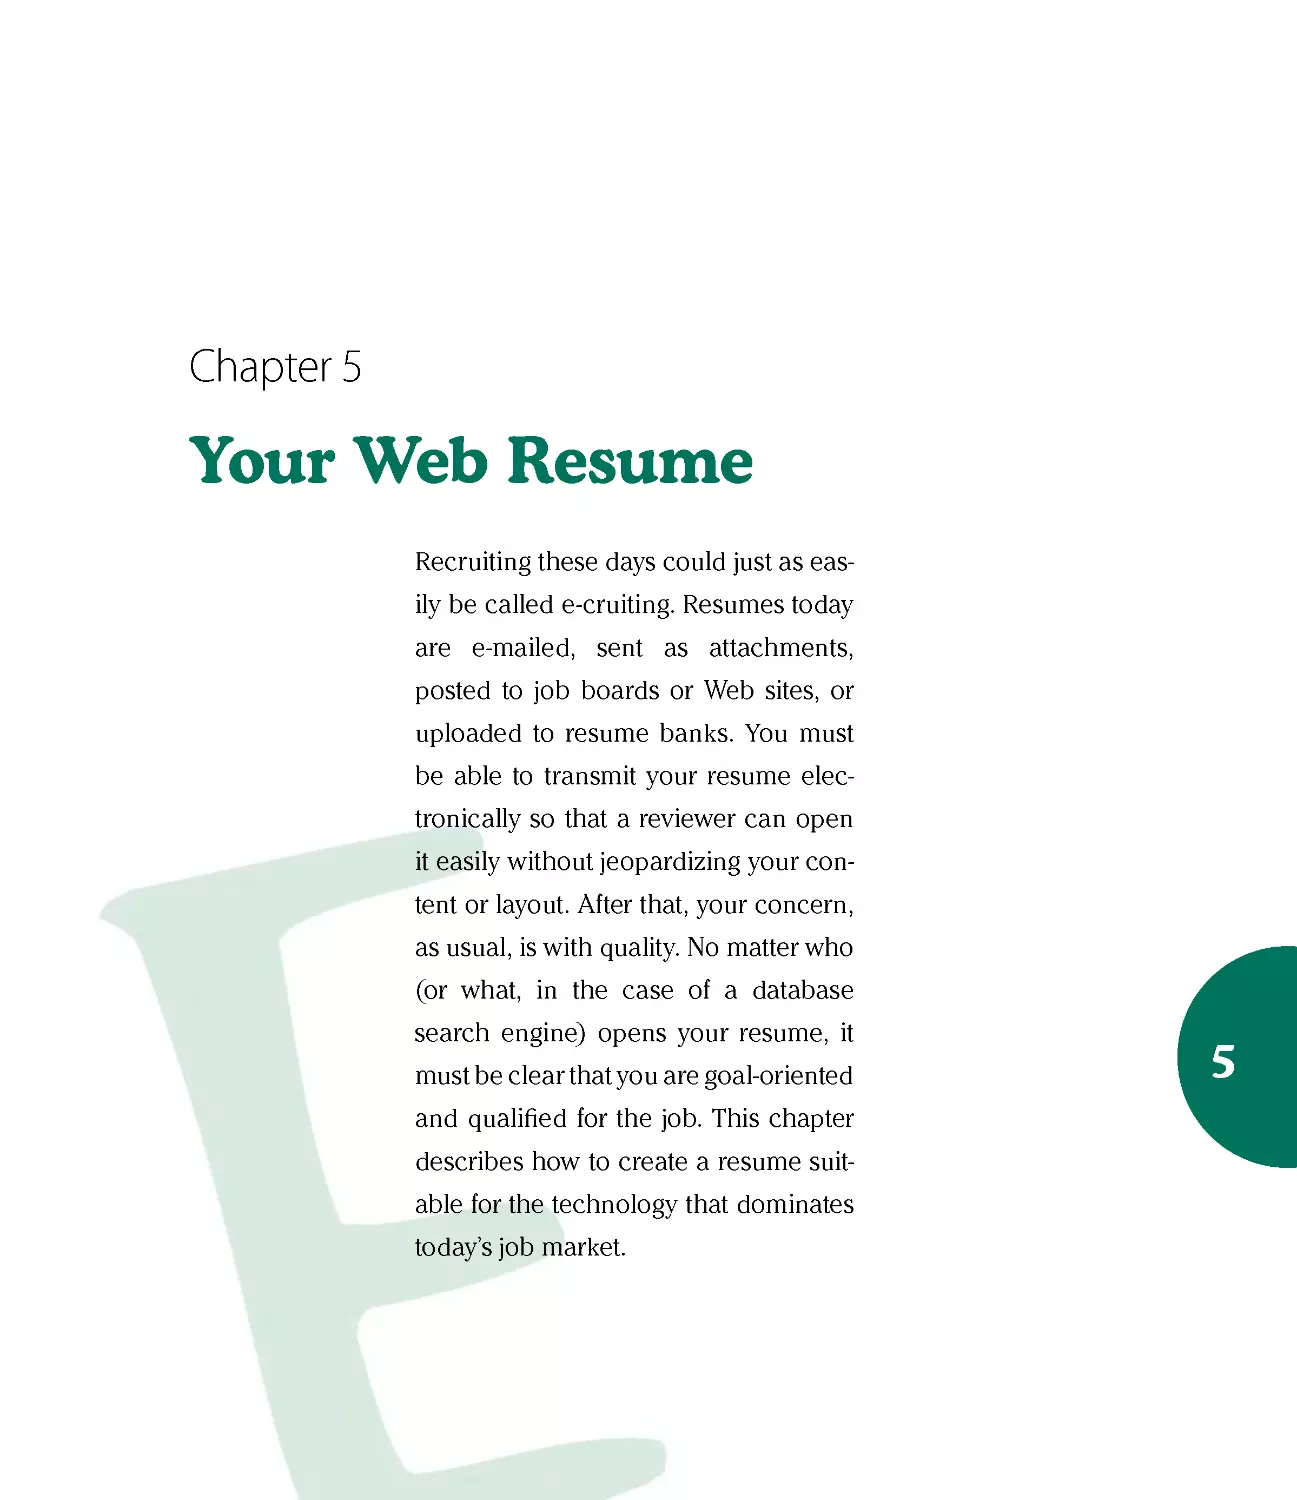 Chapter 5: Your Web Resume